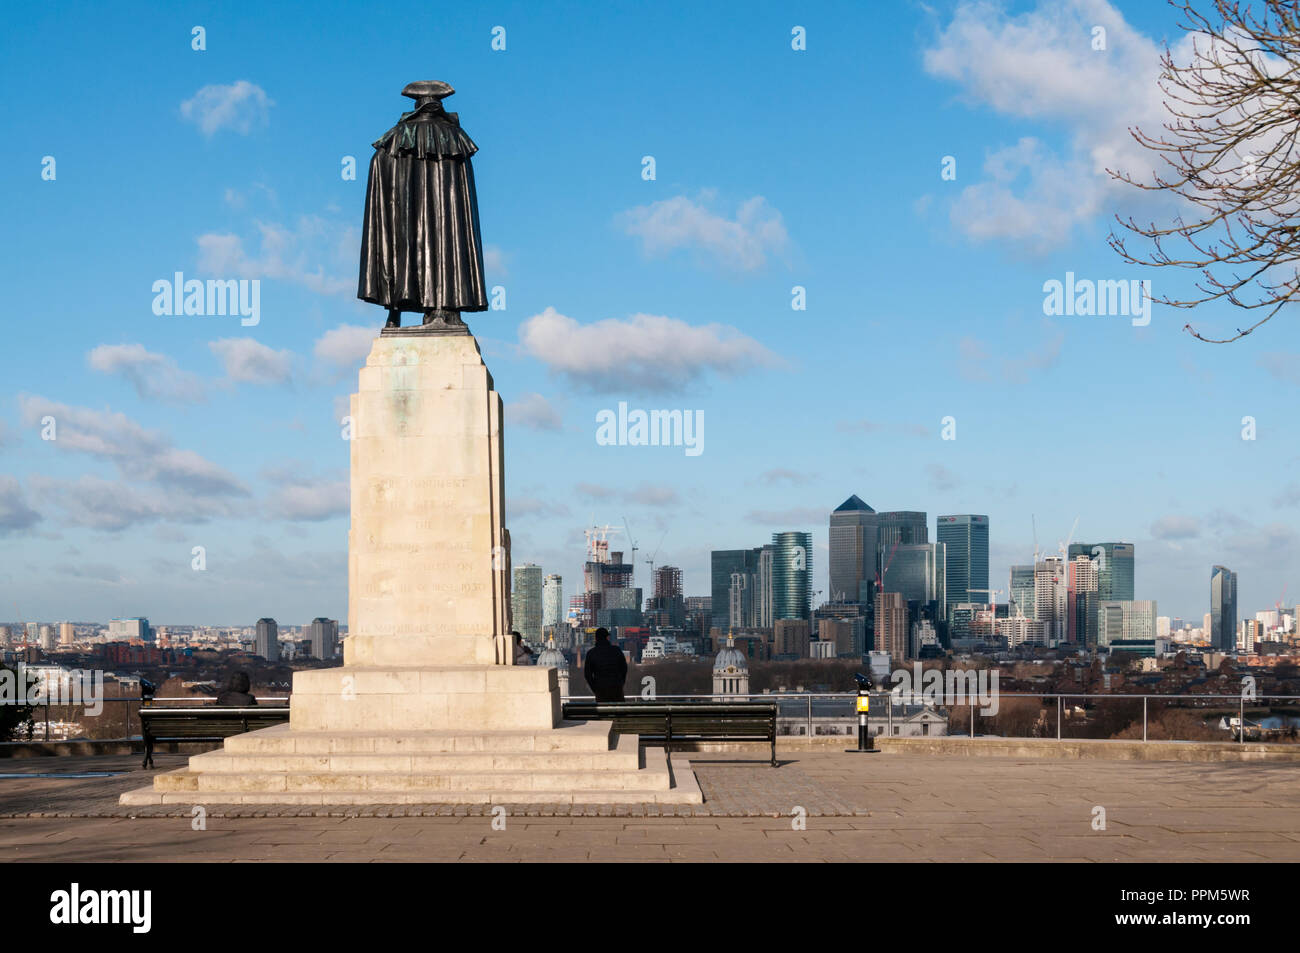 General Wolfe statue at Greenwich overlooking London Docklands. Stock Photo